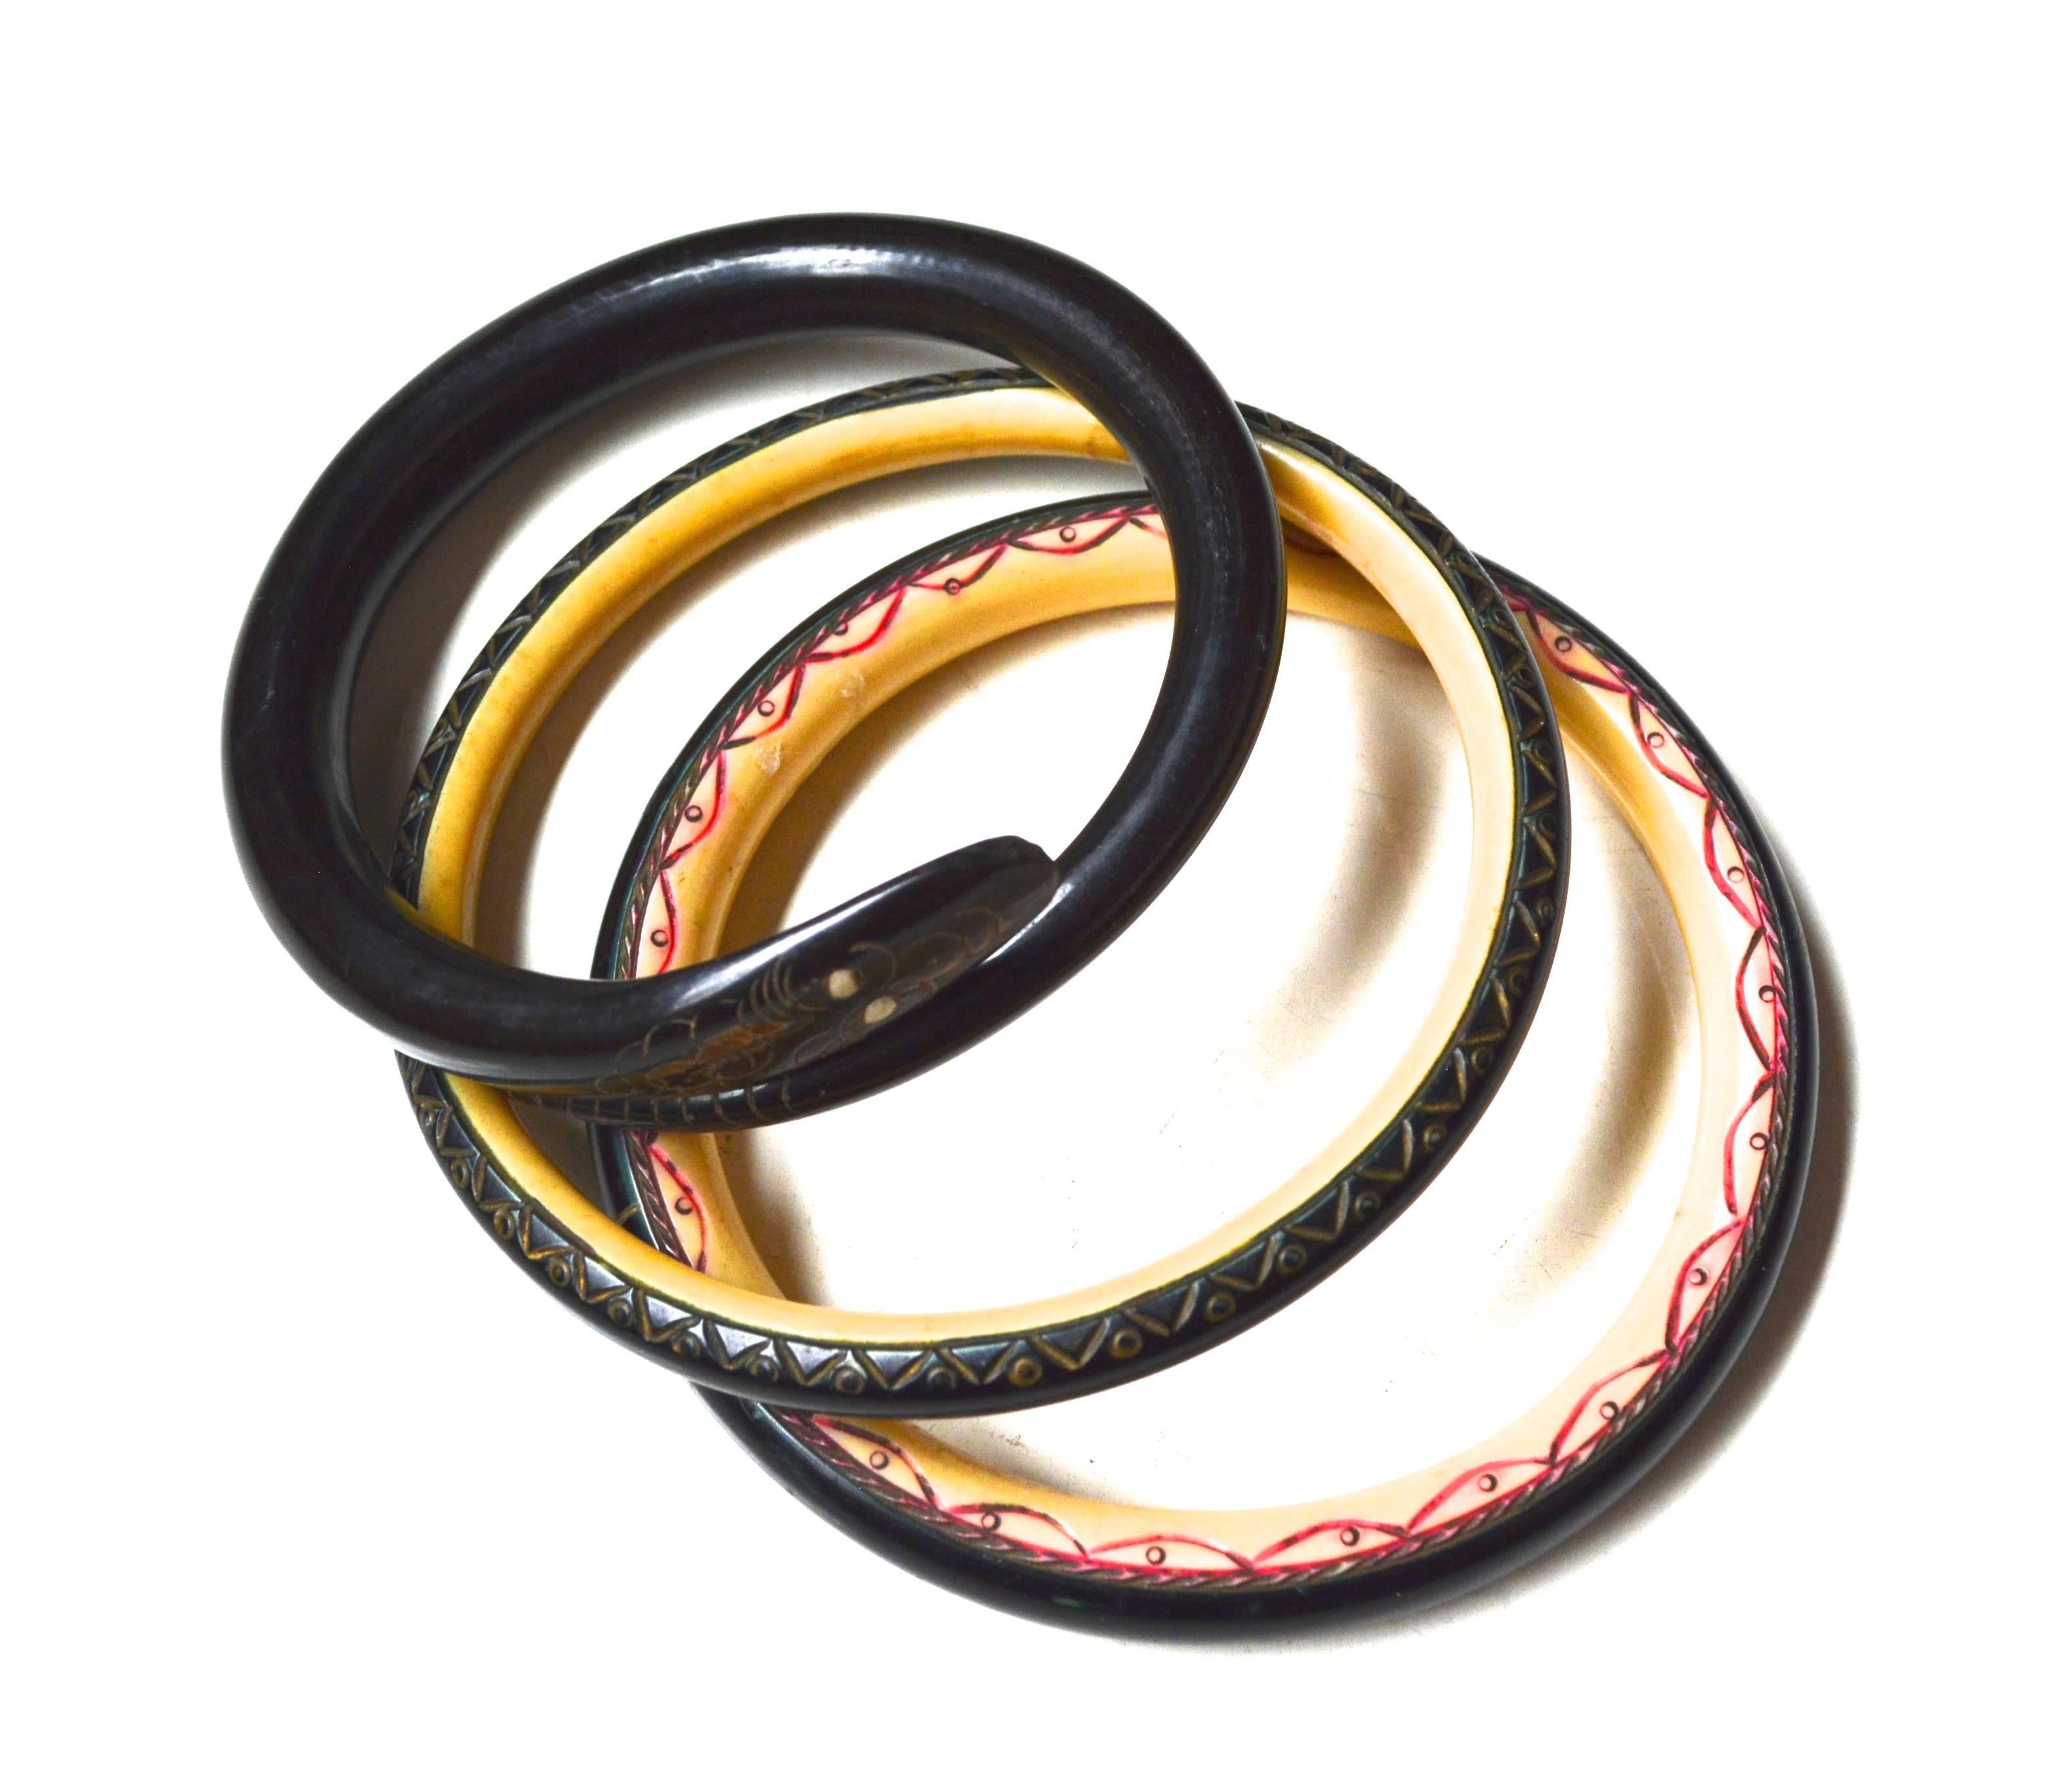 Victorian horn serpent bangle, late 1800s, in a larger wearable size. The second two bangles from the same collection appear to have a scale affect or a continuation of the snake's body. These two could be horn and celluloid from a bit later or 20s